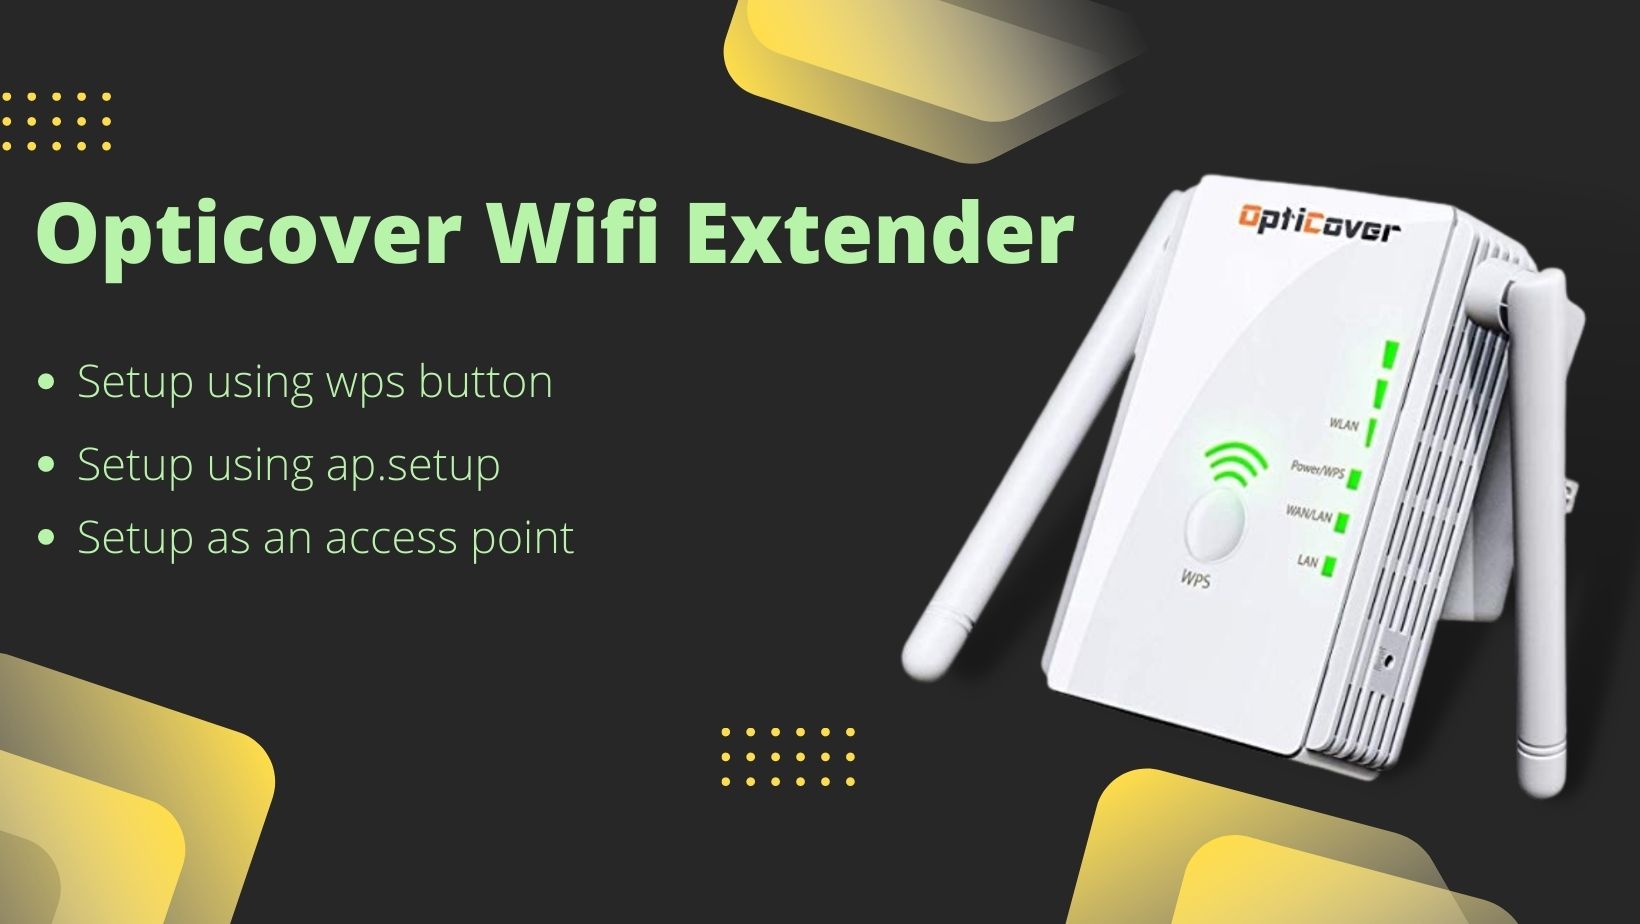 opticover wifi extender access point